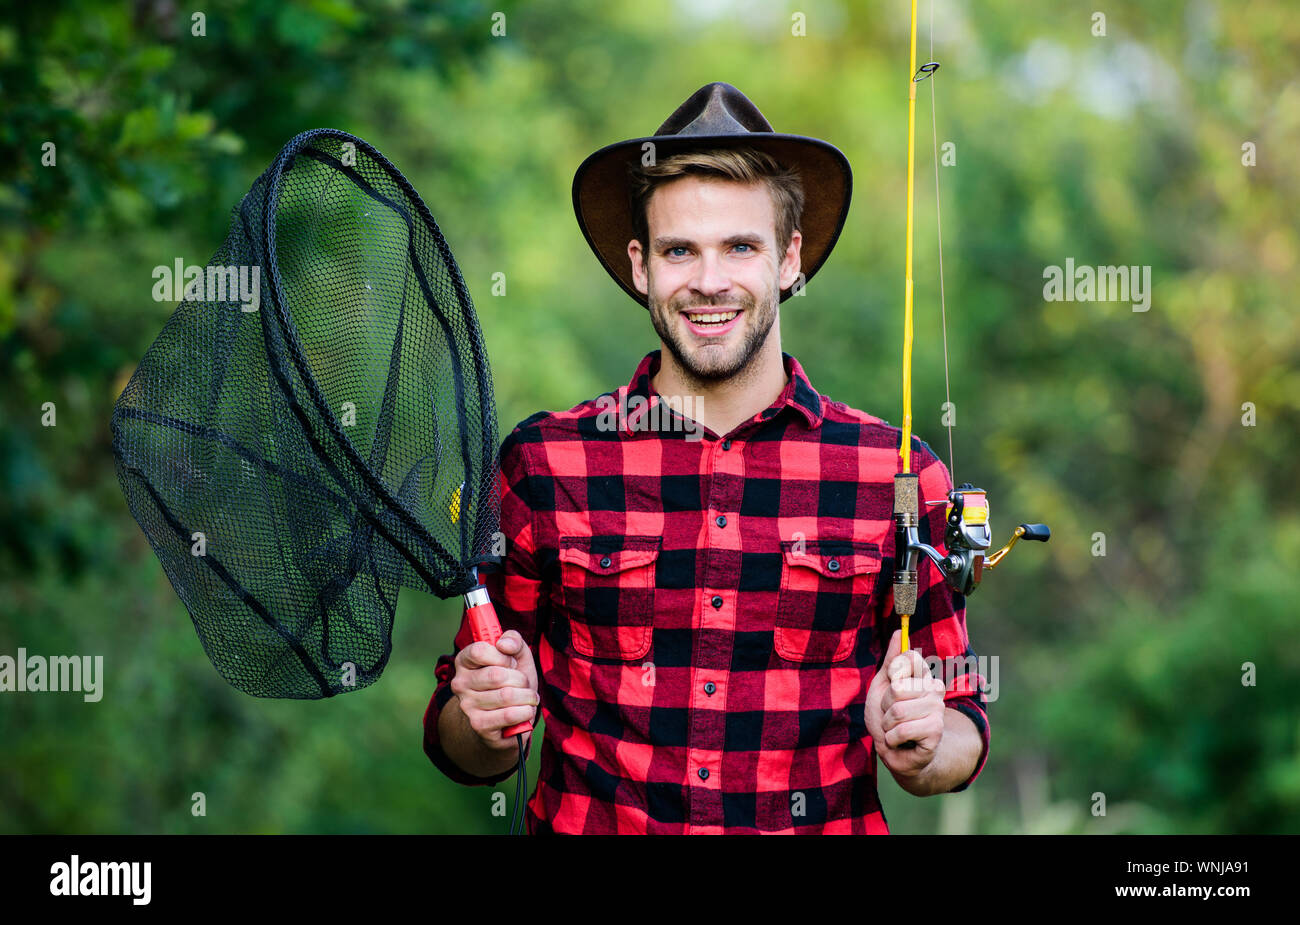 https://c8.alamy.com/comp/WNJA91/fishing-in-my-hobby-handsome-guy-in-checkered-shirt-with-fishing-equipment-nature-background-summer-weekend-concept-hipster-fisherman-with-rod-spinning-net-hope-for-nice-fishing-fishing-day-WNJA91.jpg